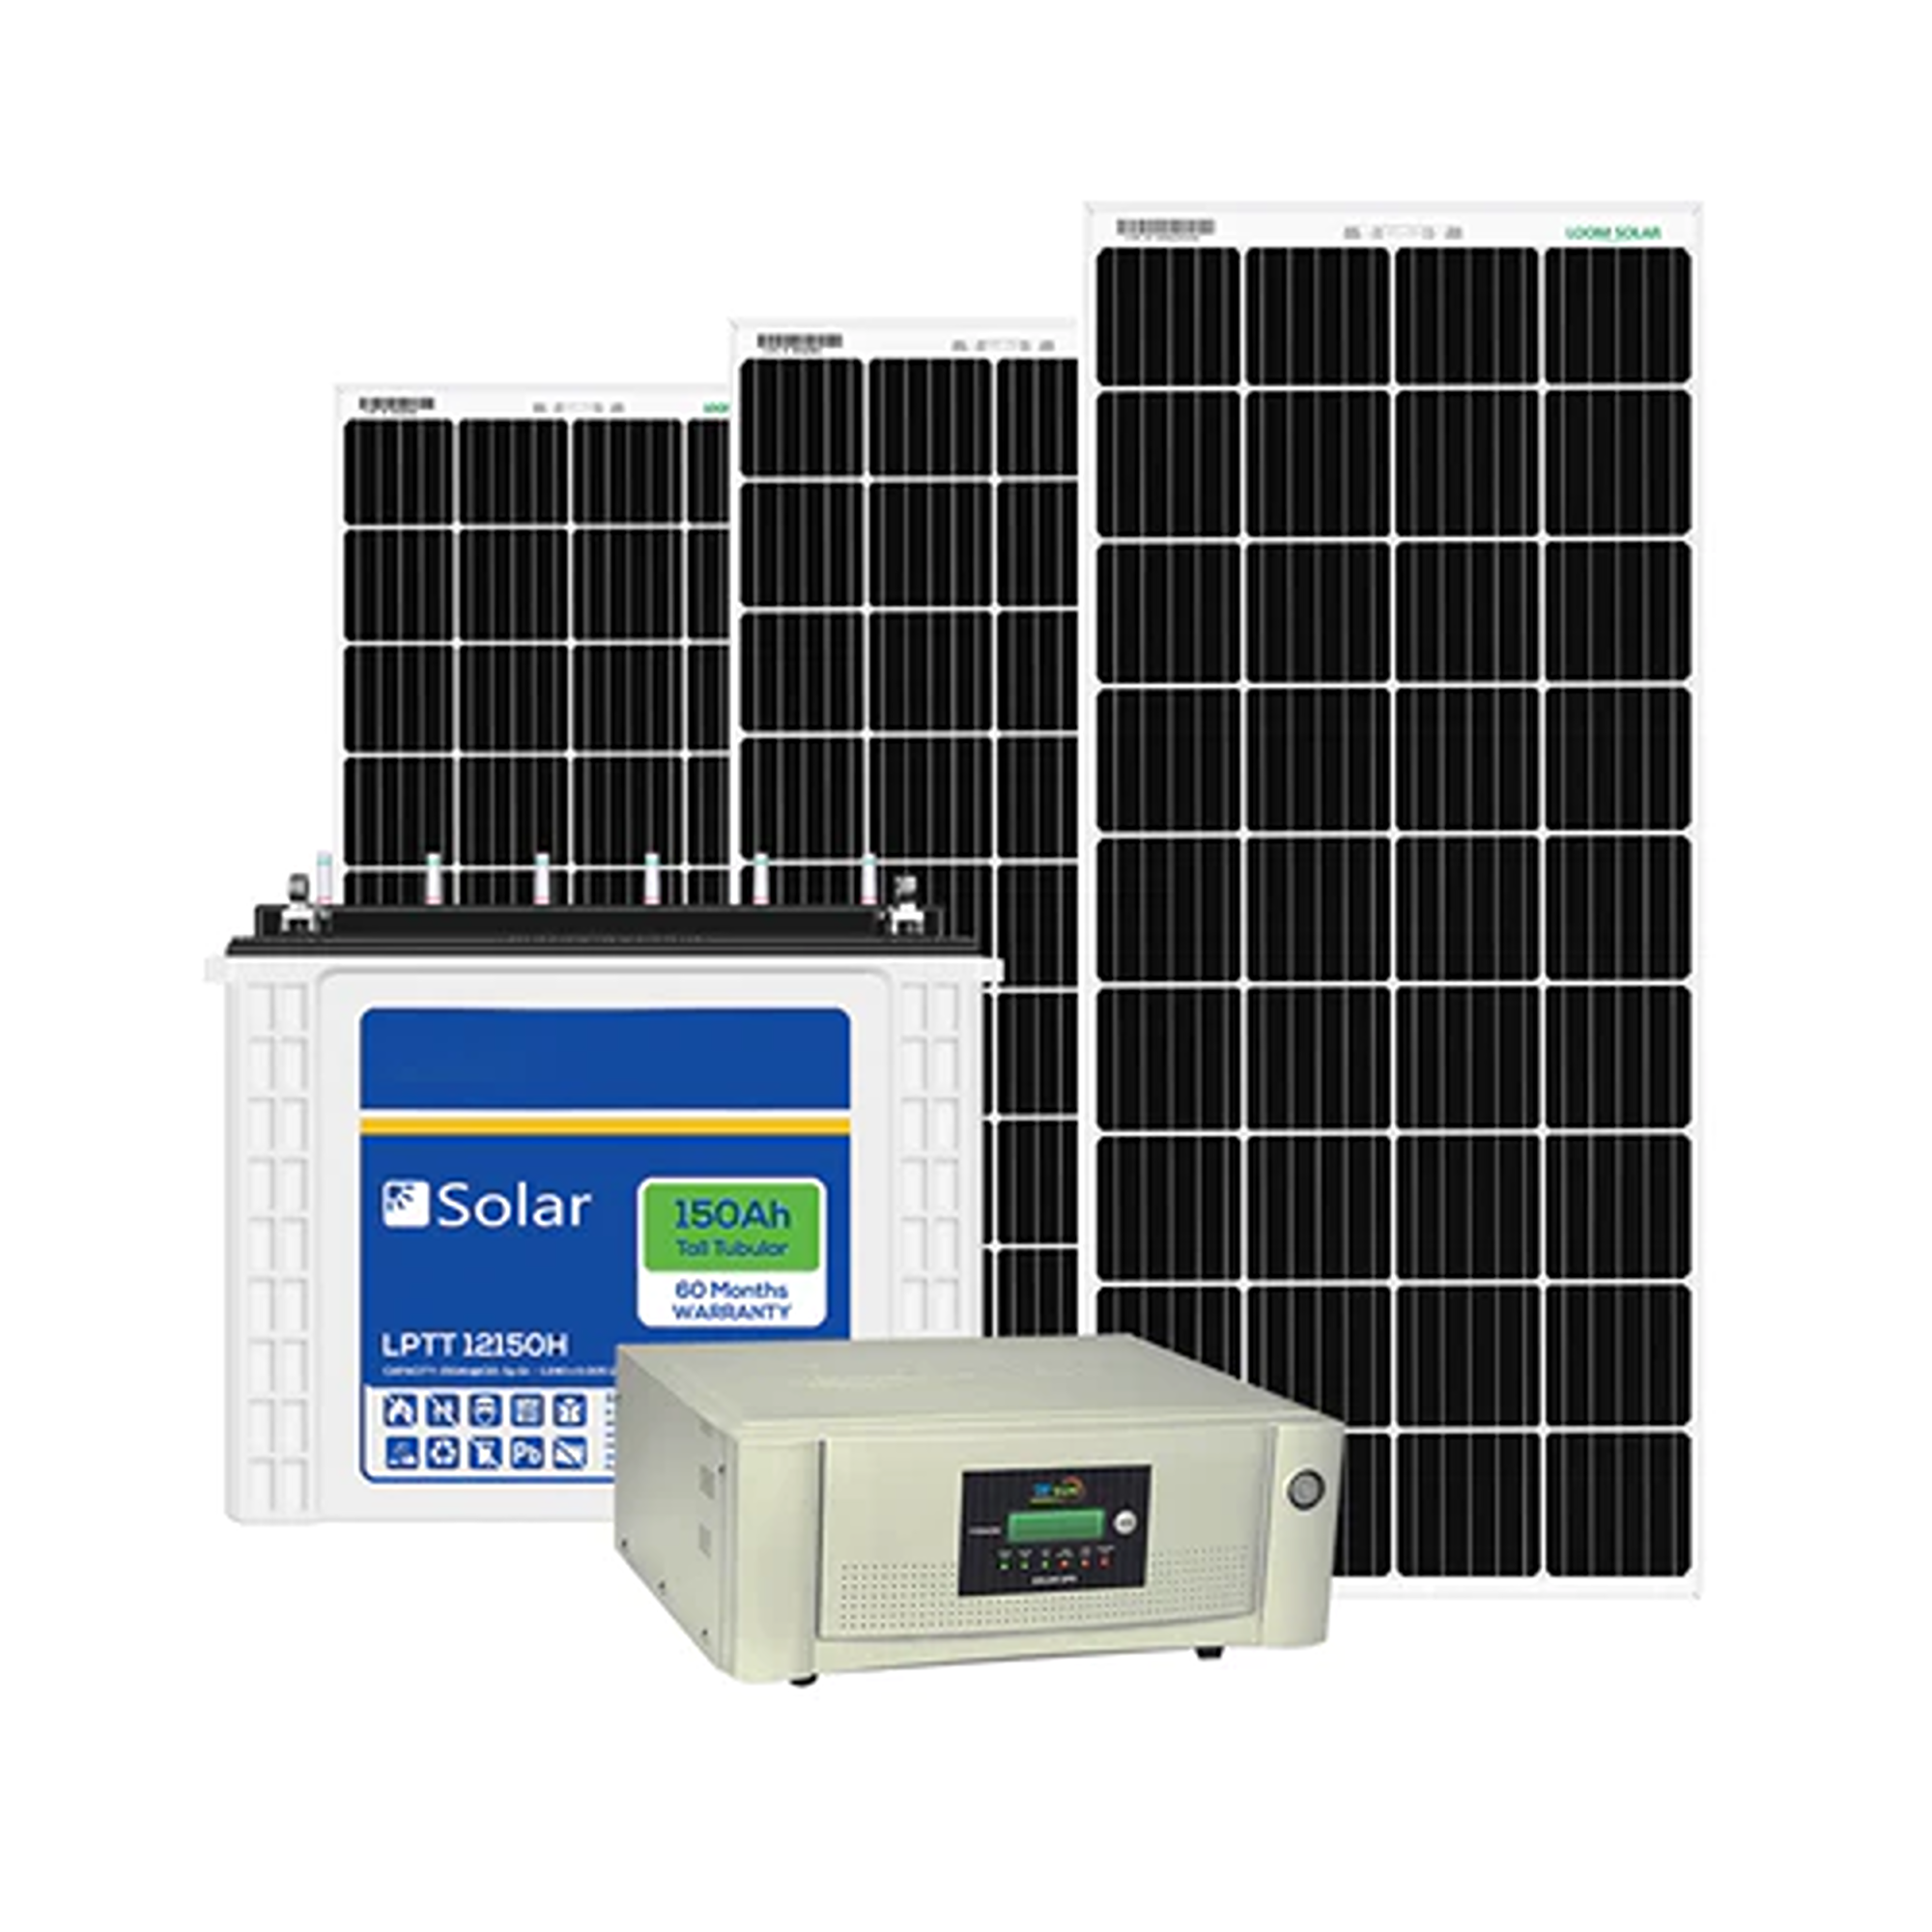 0.5 kW off grid solar system with 4-5 hours backup